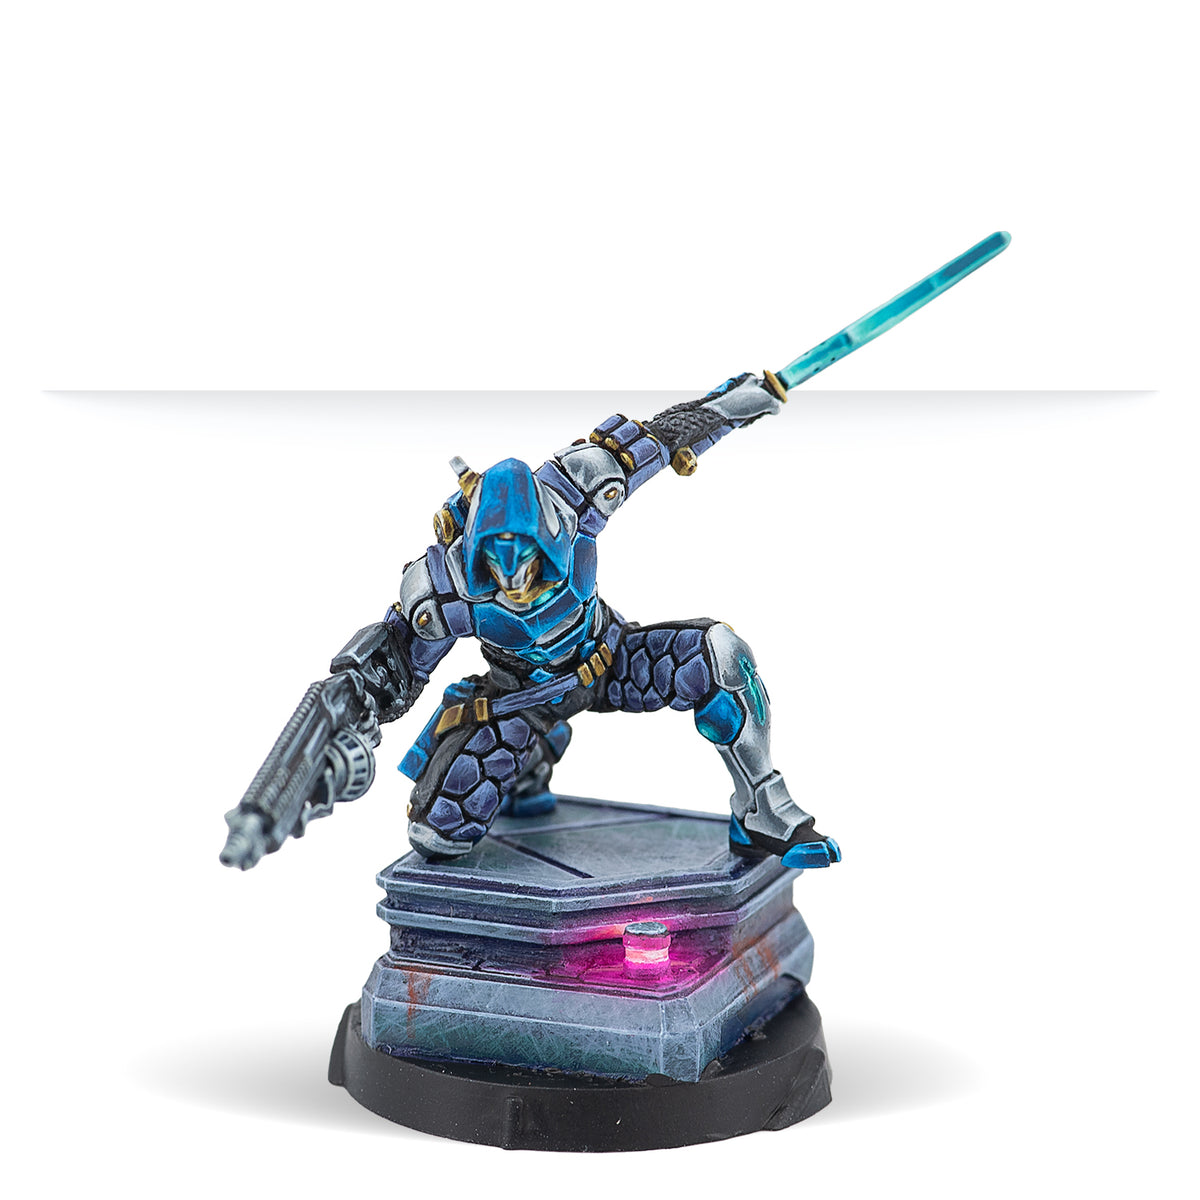 Reinf. Nightshades, Clandestine Action Unit [MAY PRE-ORDER]